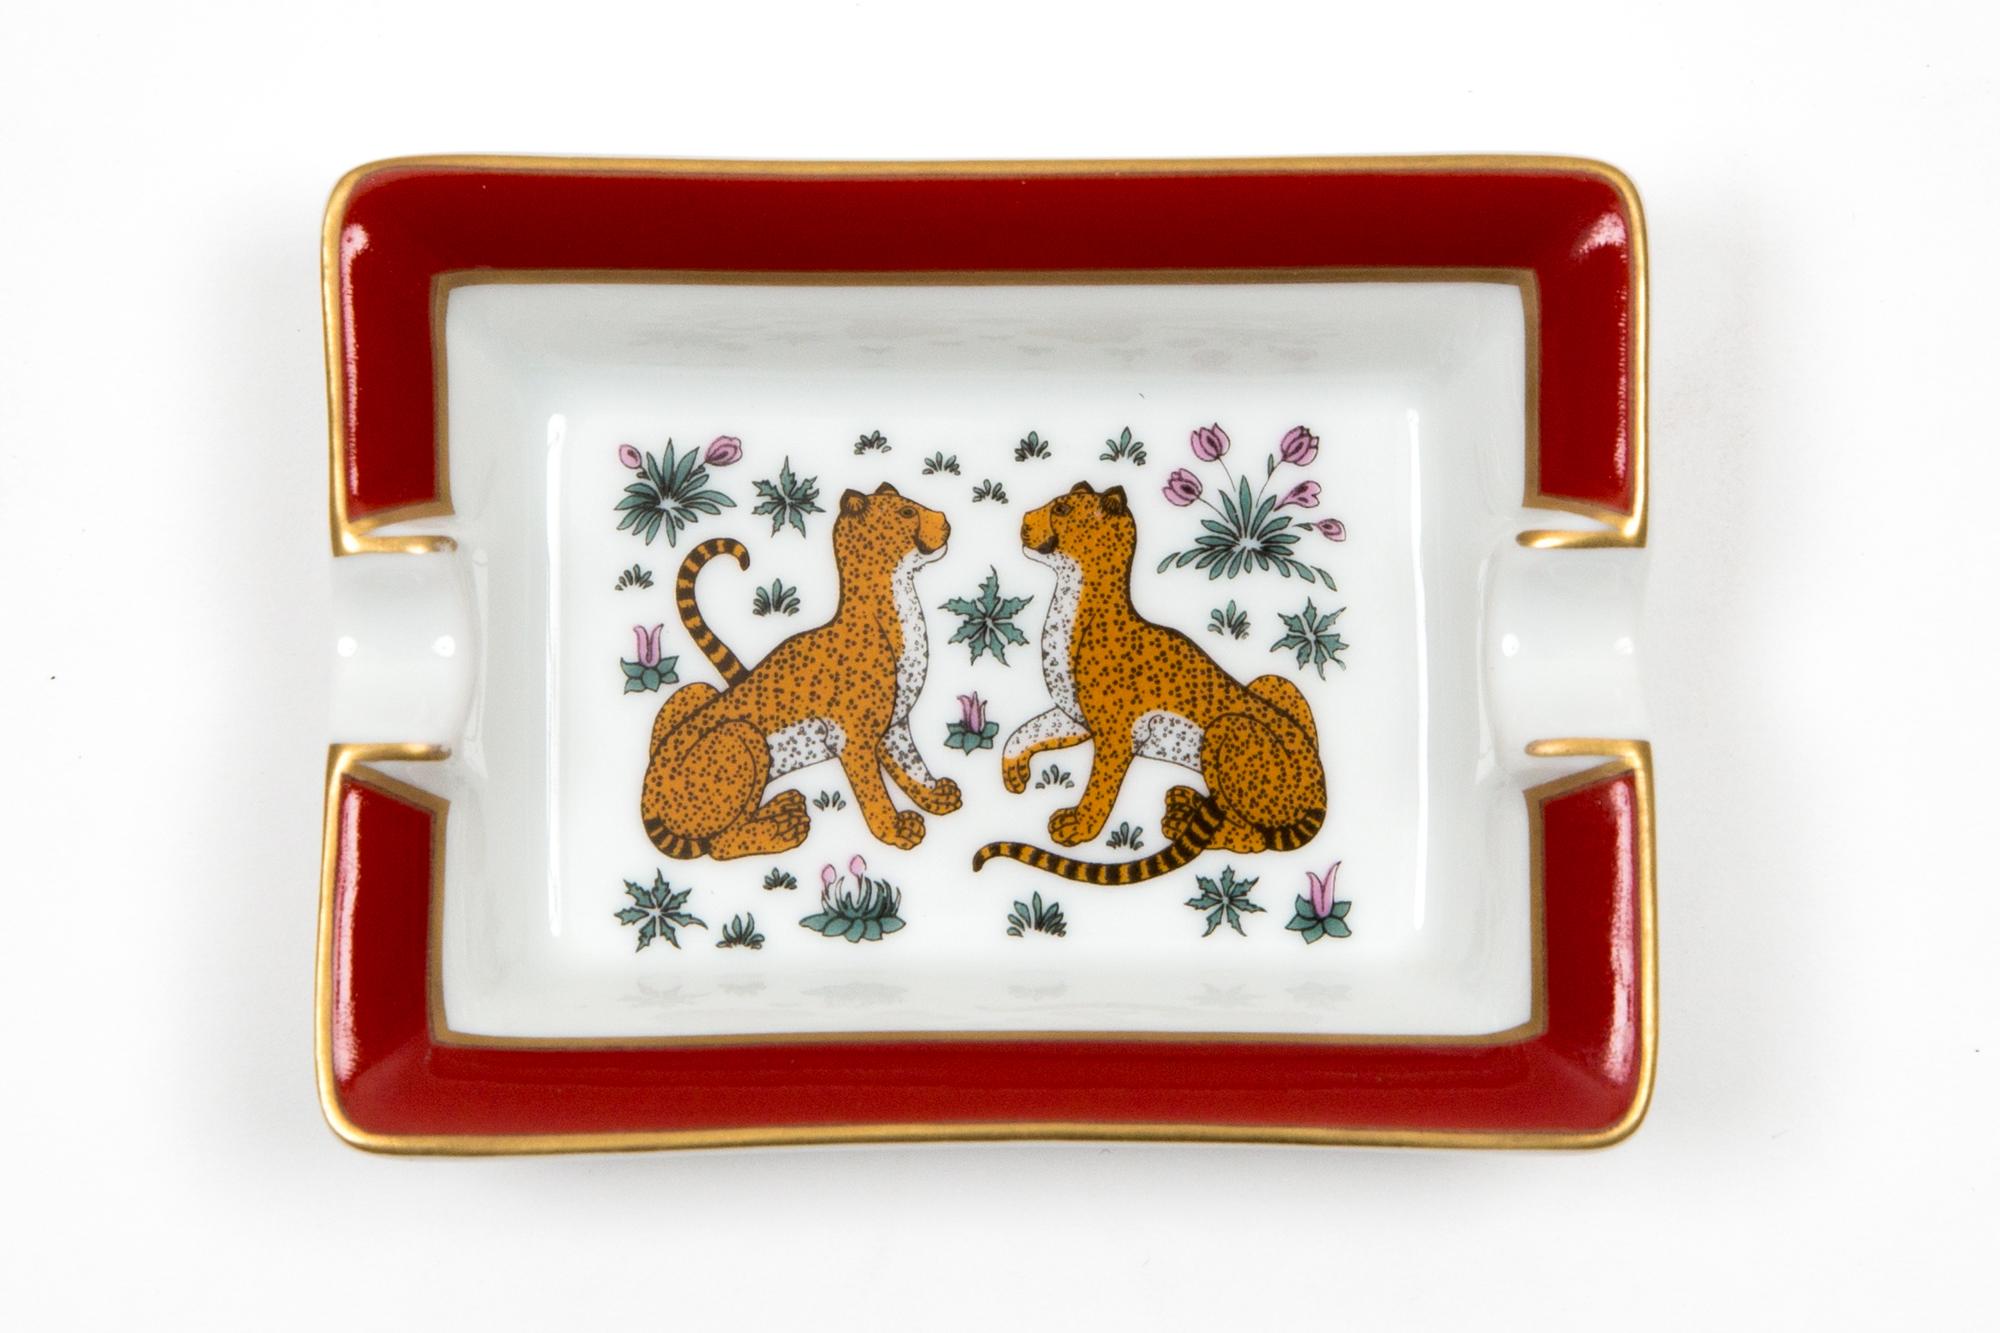 Hermes Leopard Porcelain Small Size Ashtray or Organizer For Sale 3